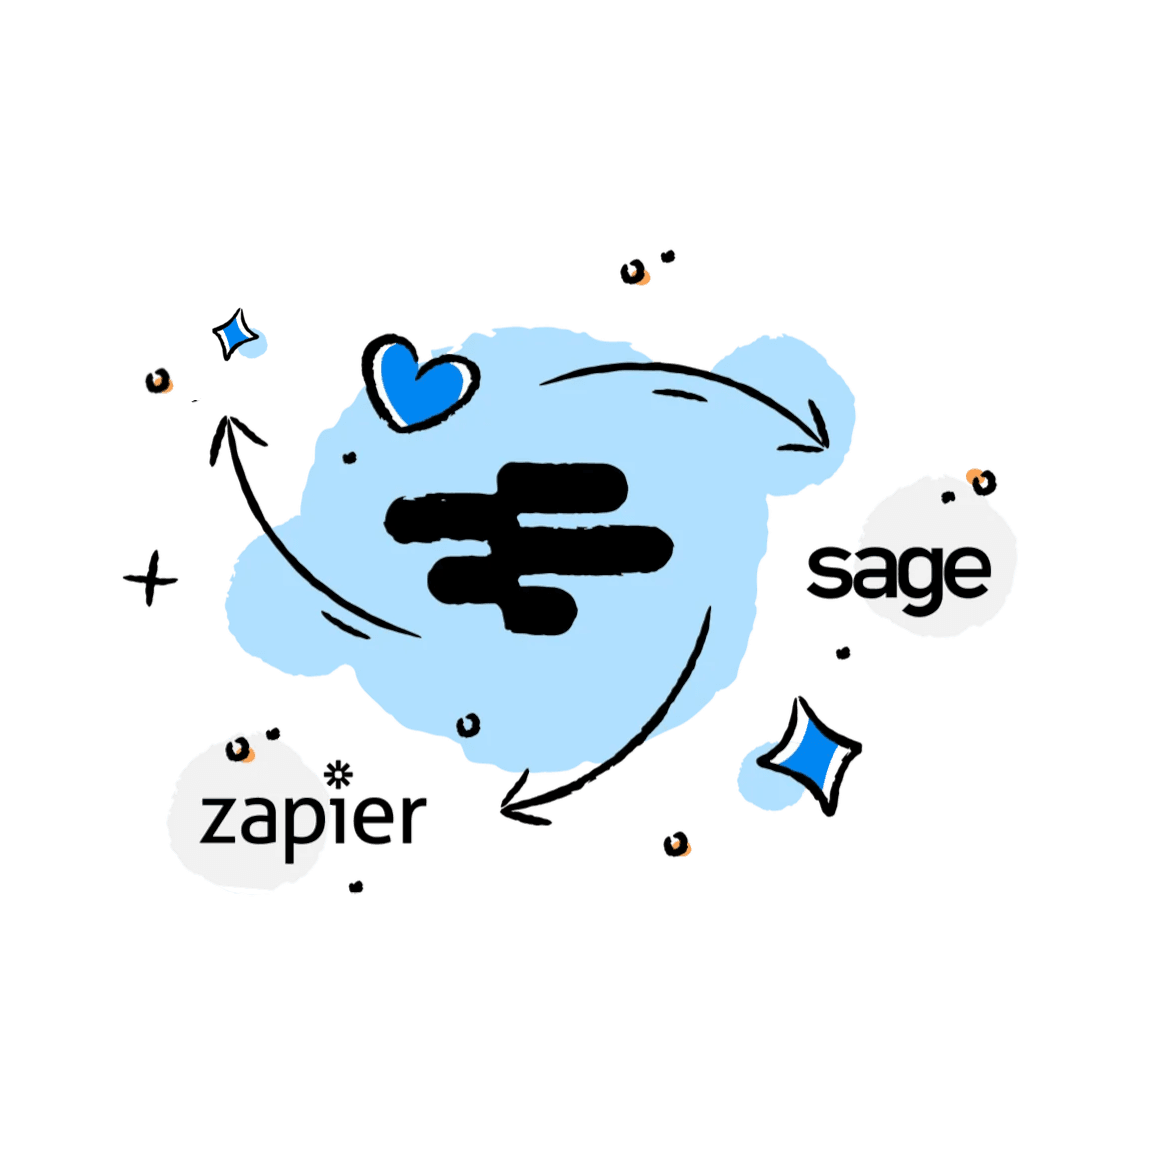 Graphic showing the RotaCloud logo with arrows pointing to Sage and Zapier logos, signifying product integrations.